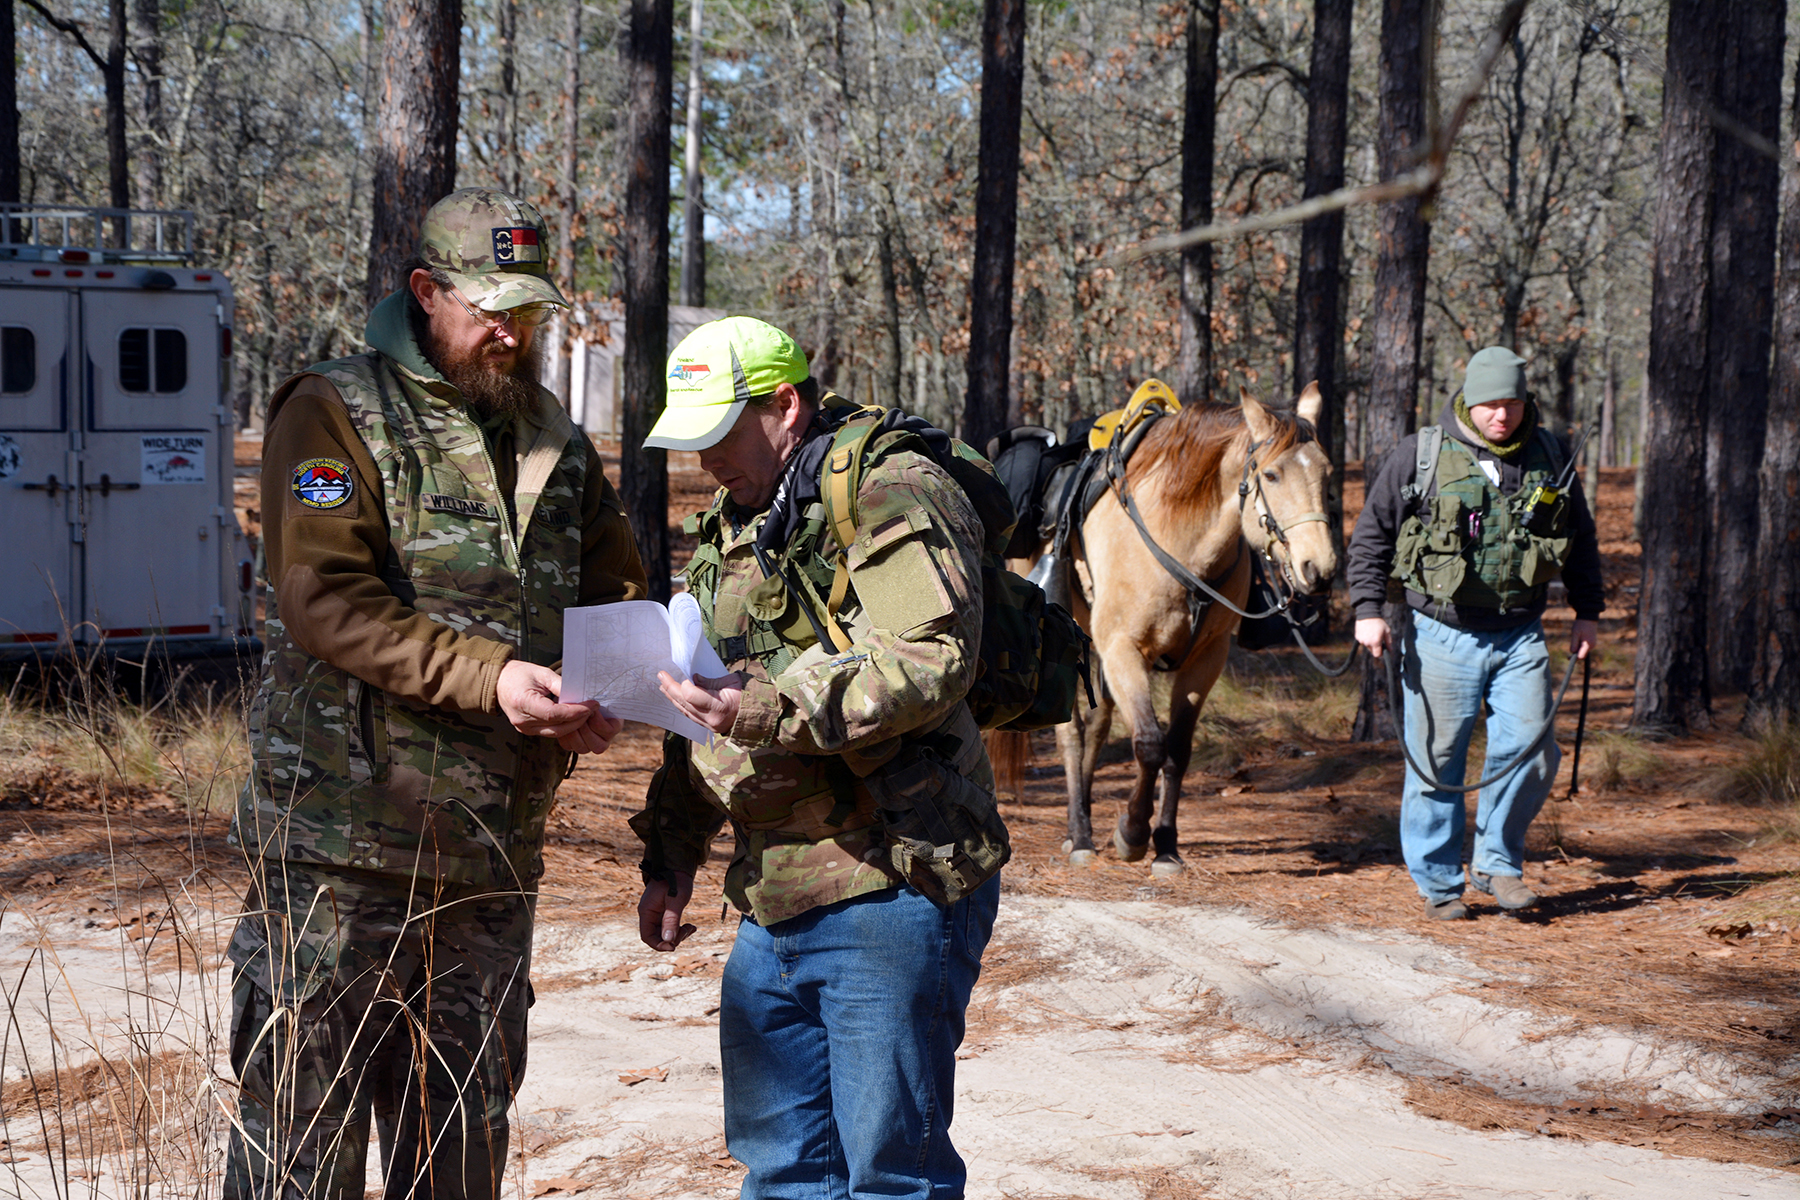 Search and rescue team members consult a map before heading into the woods on horseback